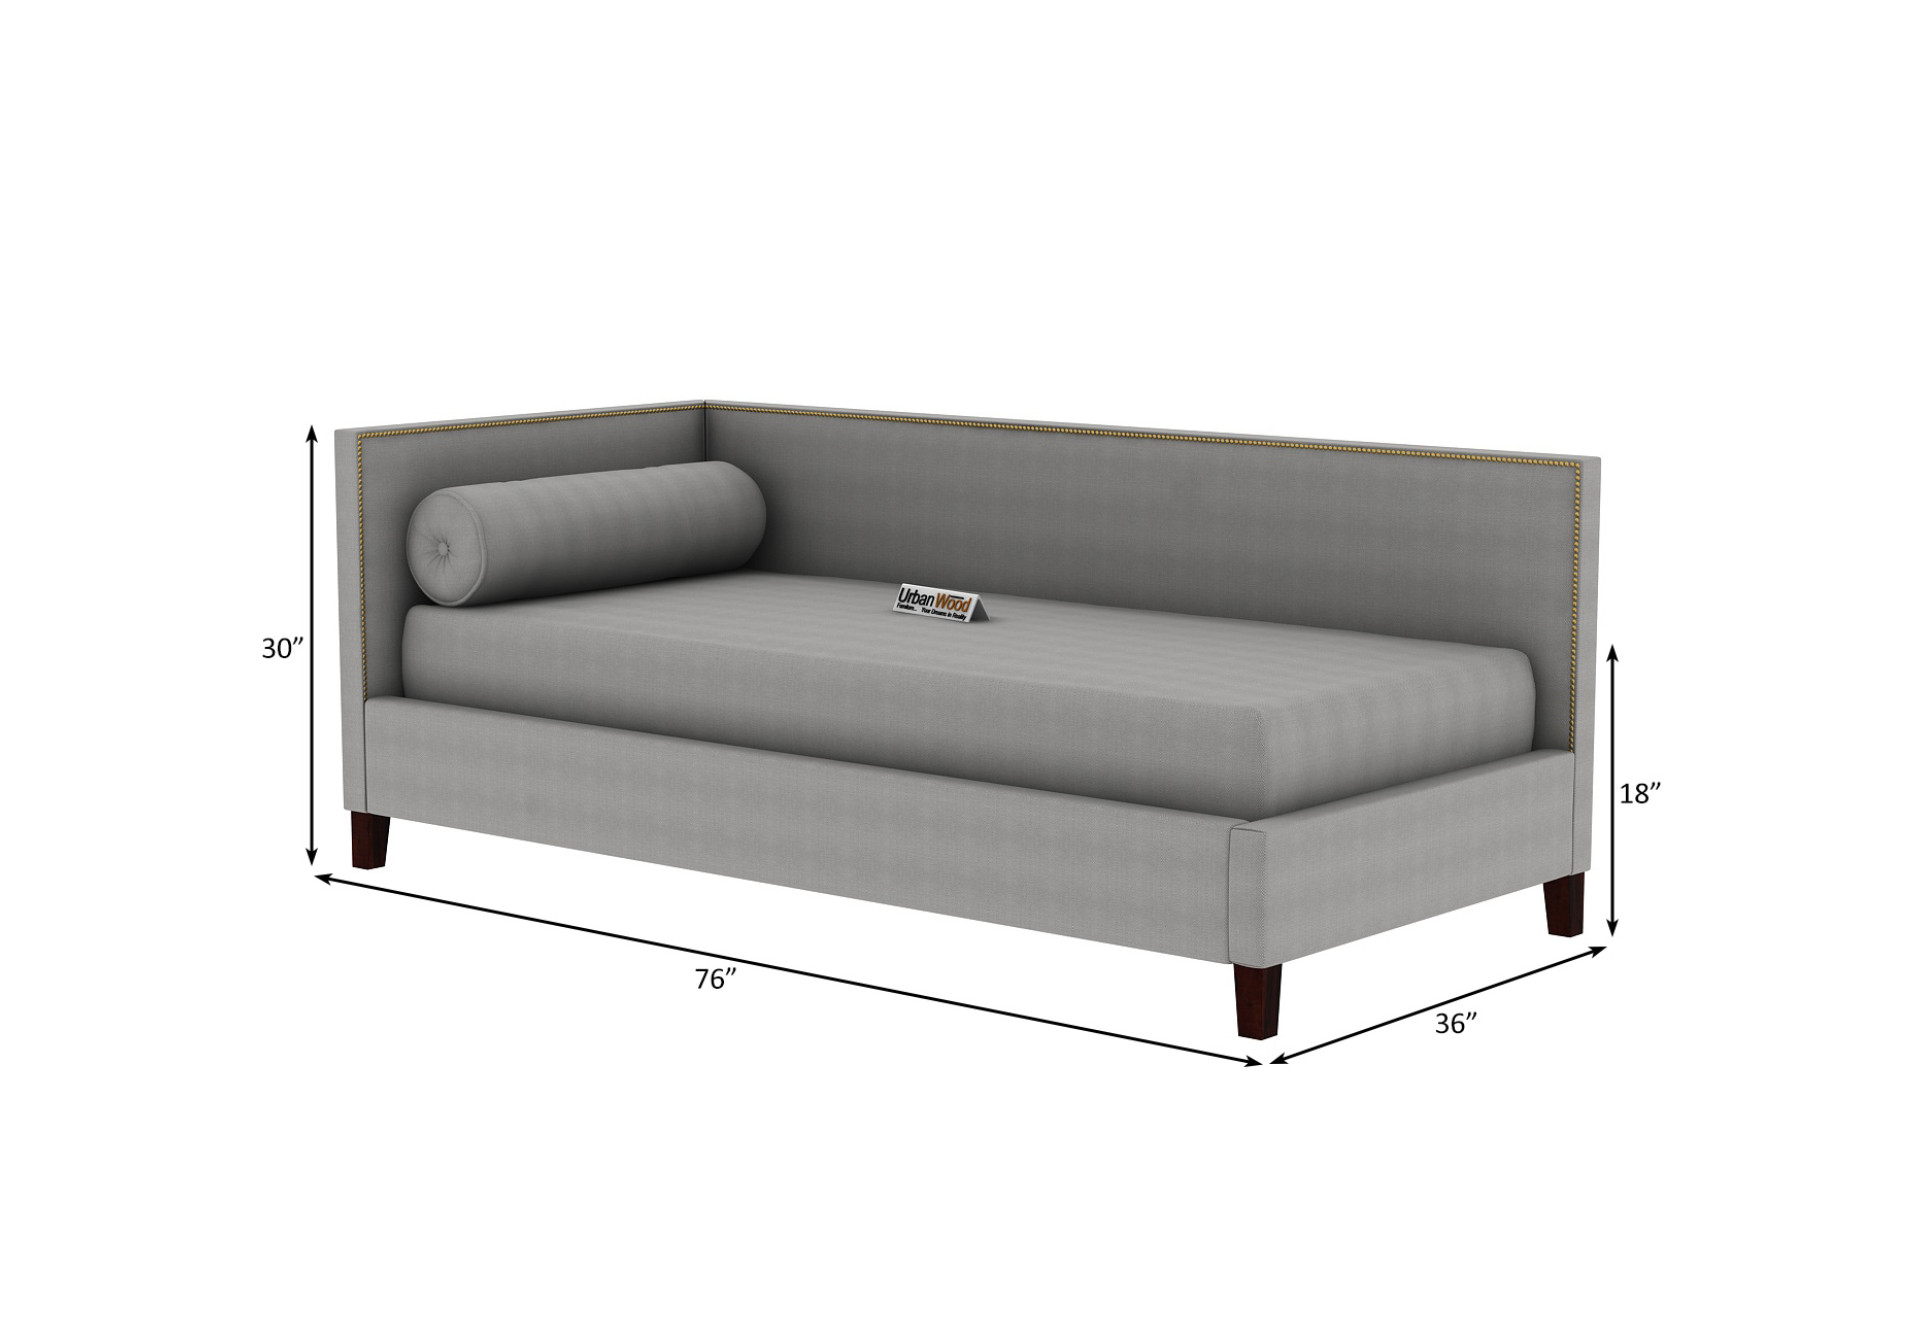 Bumble Chaise Lounge (Cotton, Steel Grey)